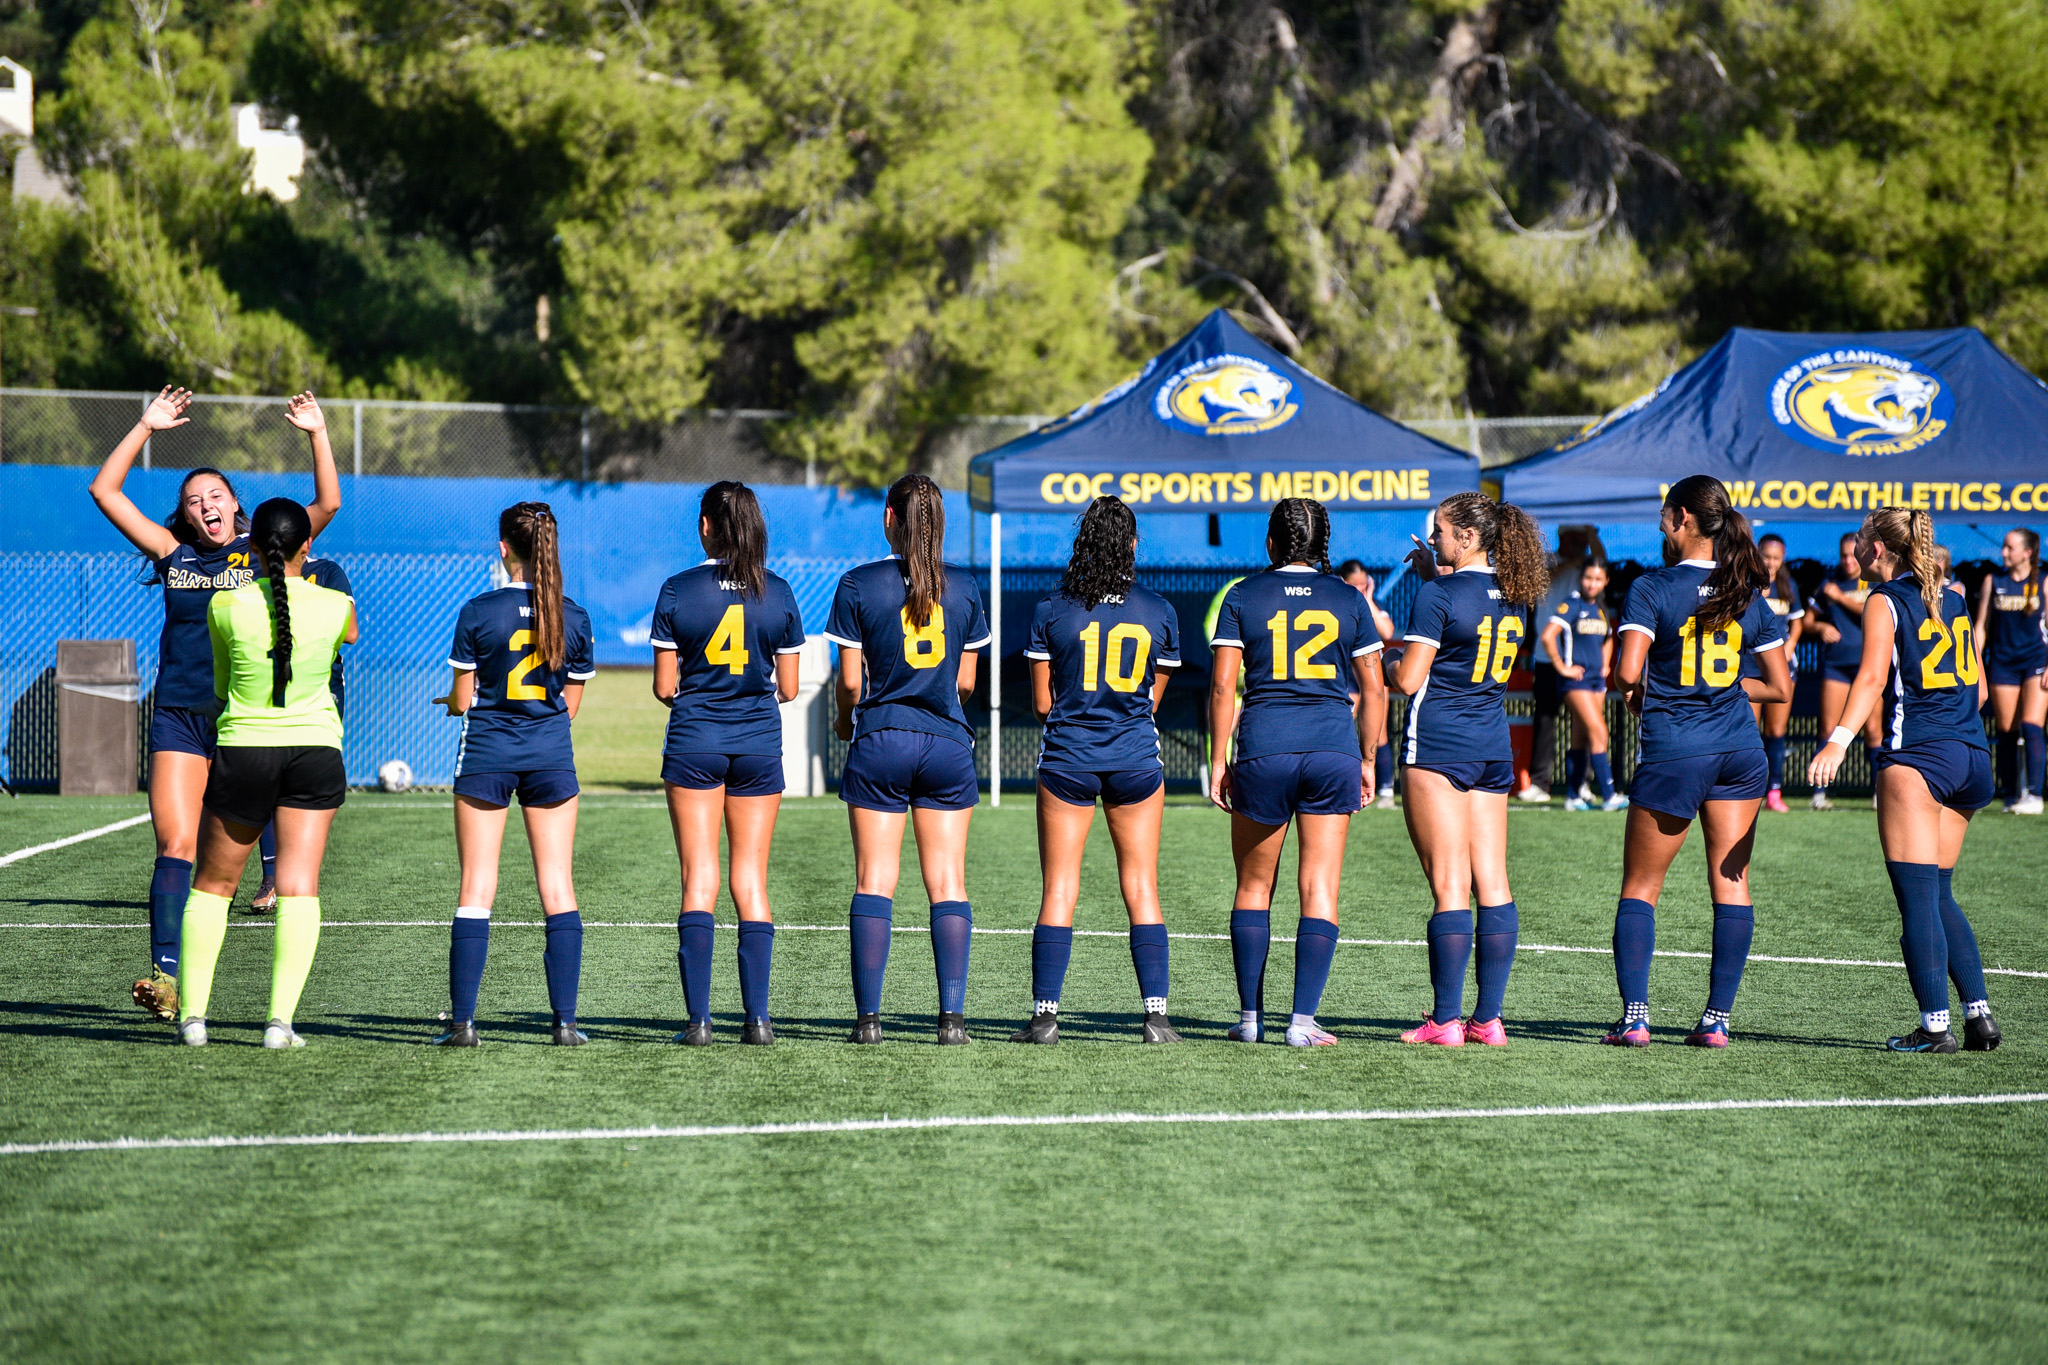 Stock image of College of the Canyons women's soccer team.